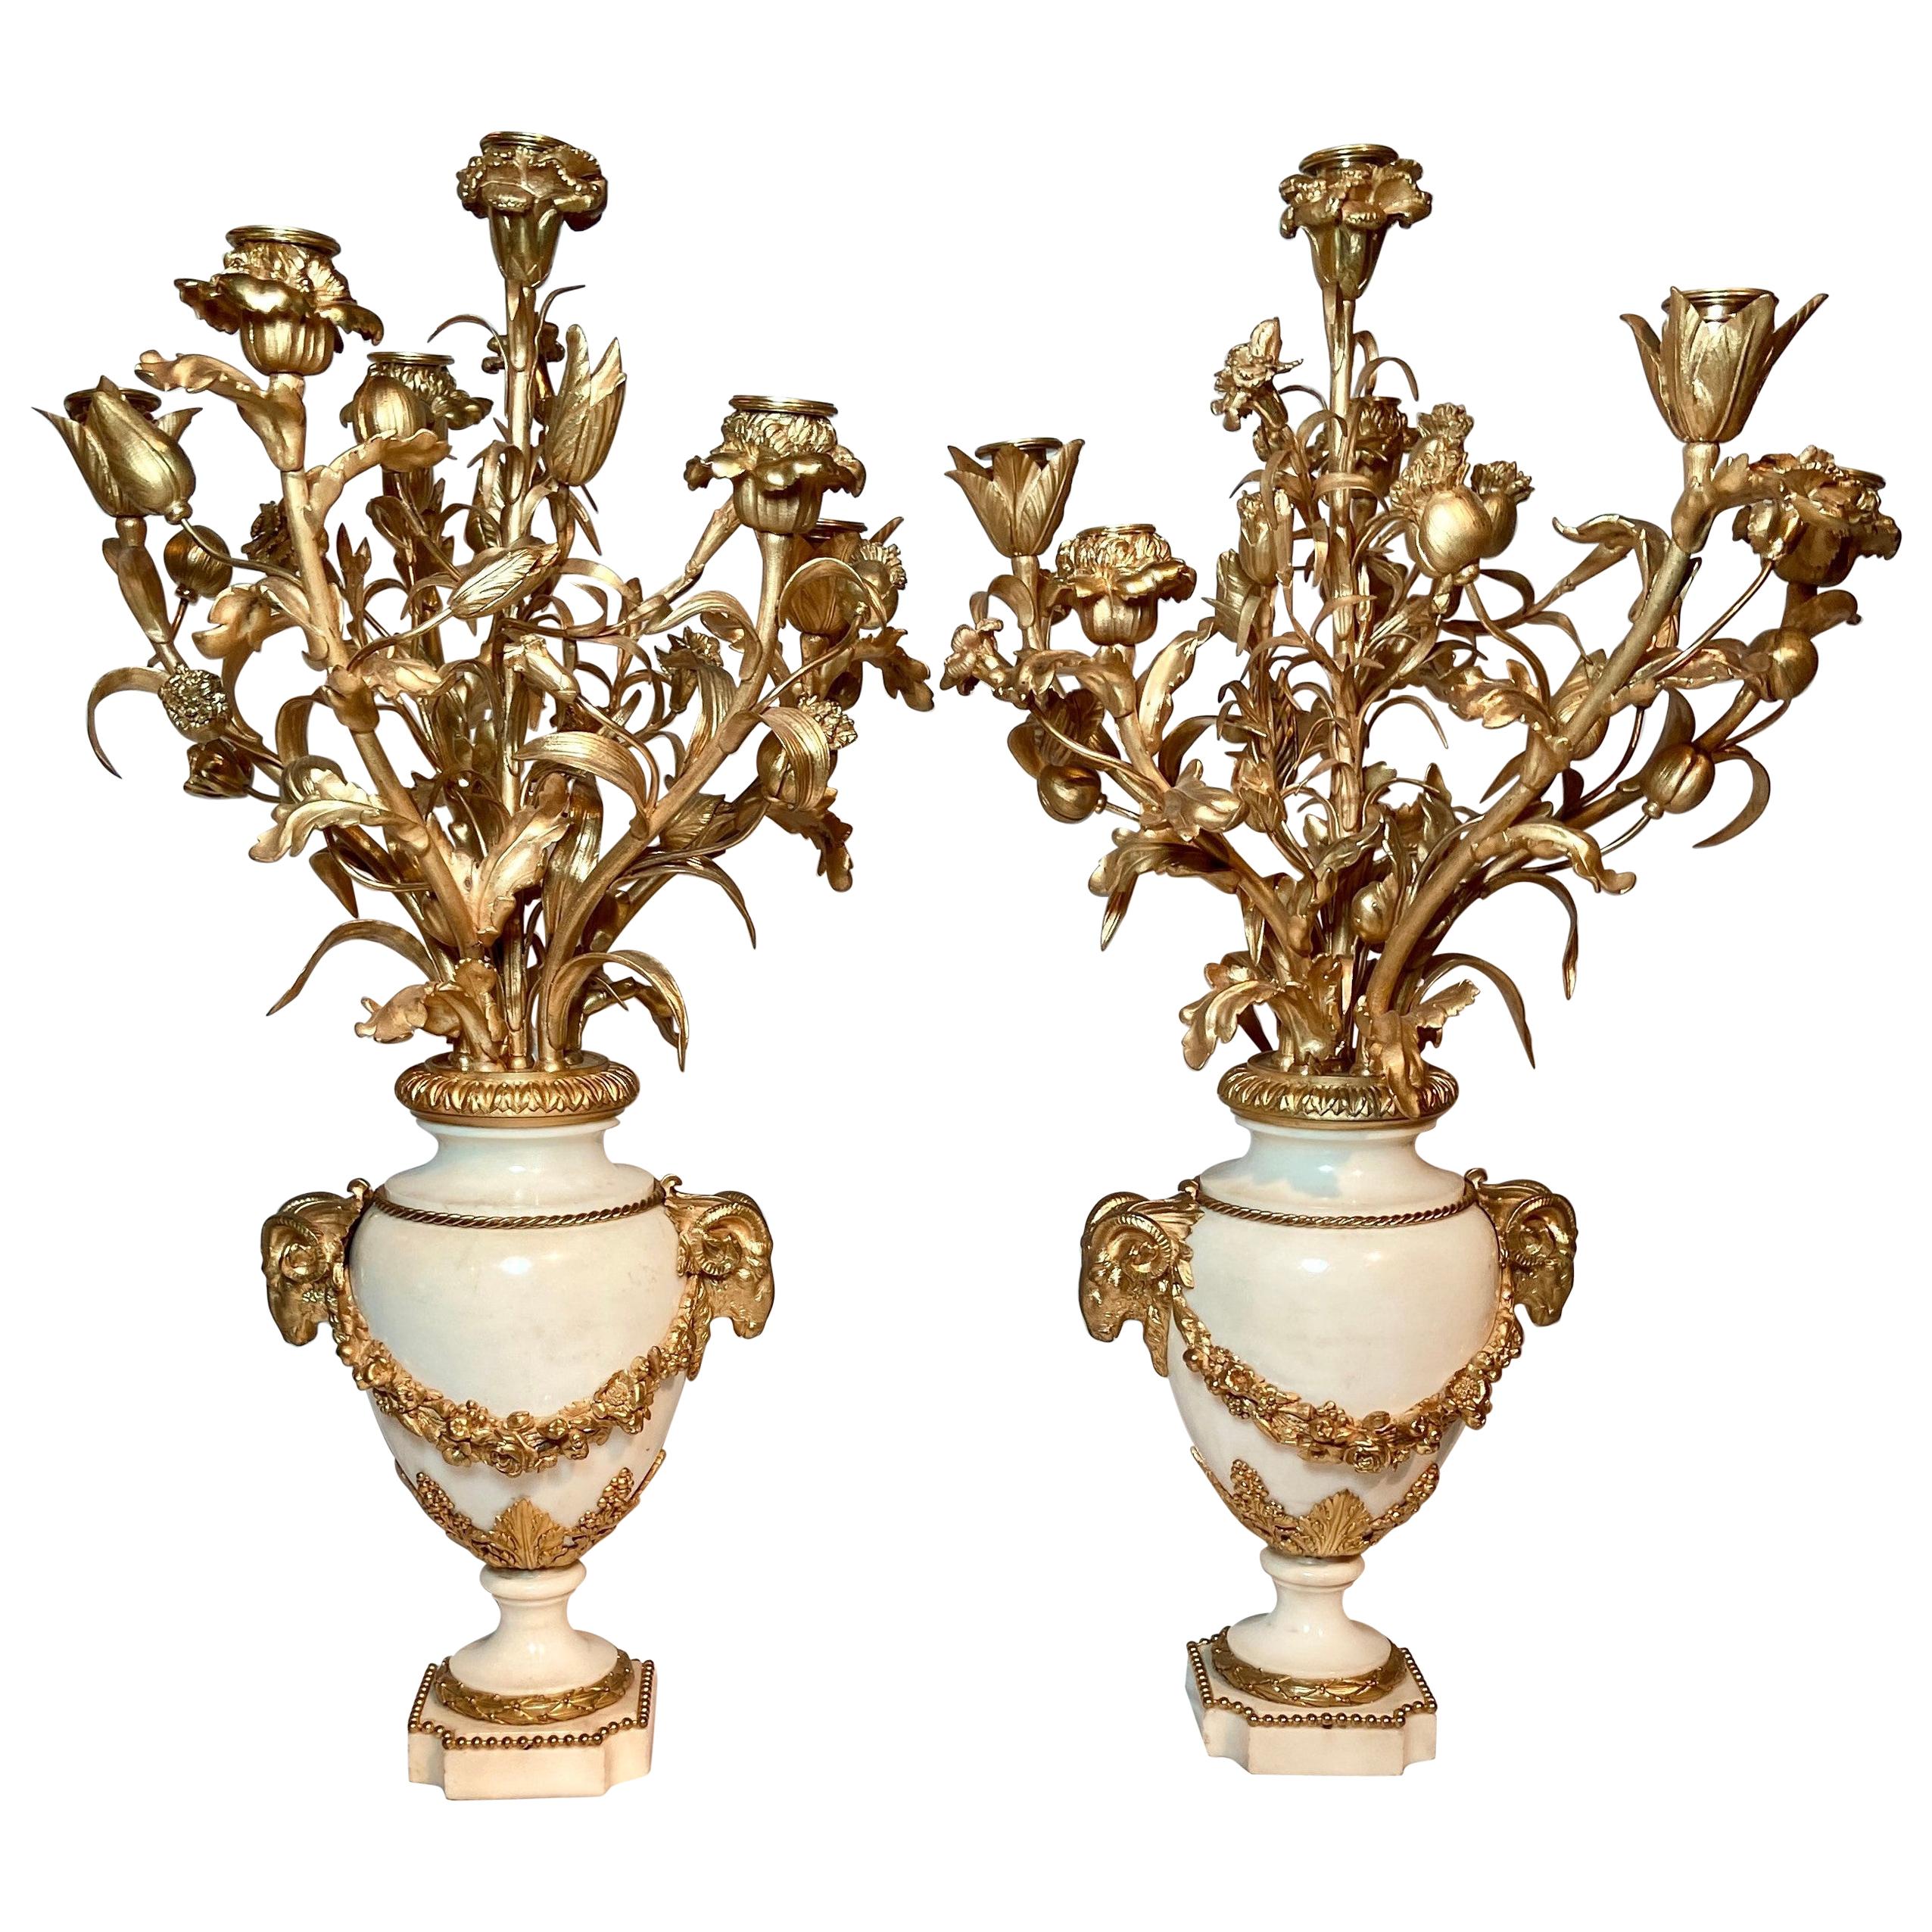 Pair Antique French Carrara Marble and Bronze D'ore Candelabra, Circa 1880 For Sale